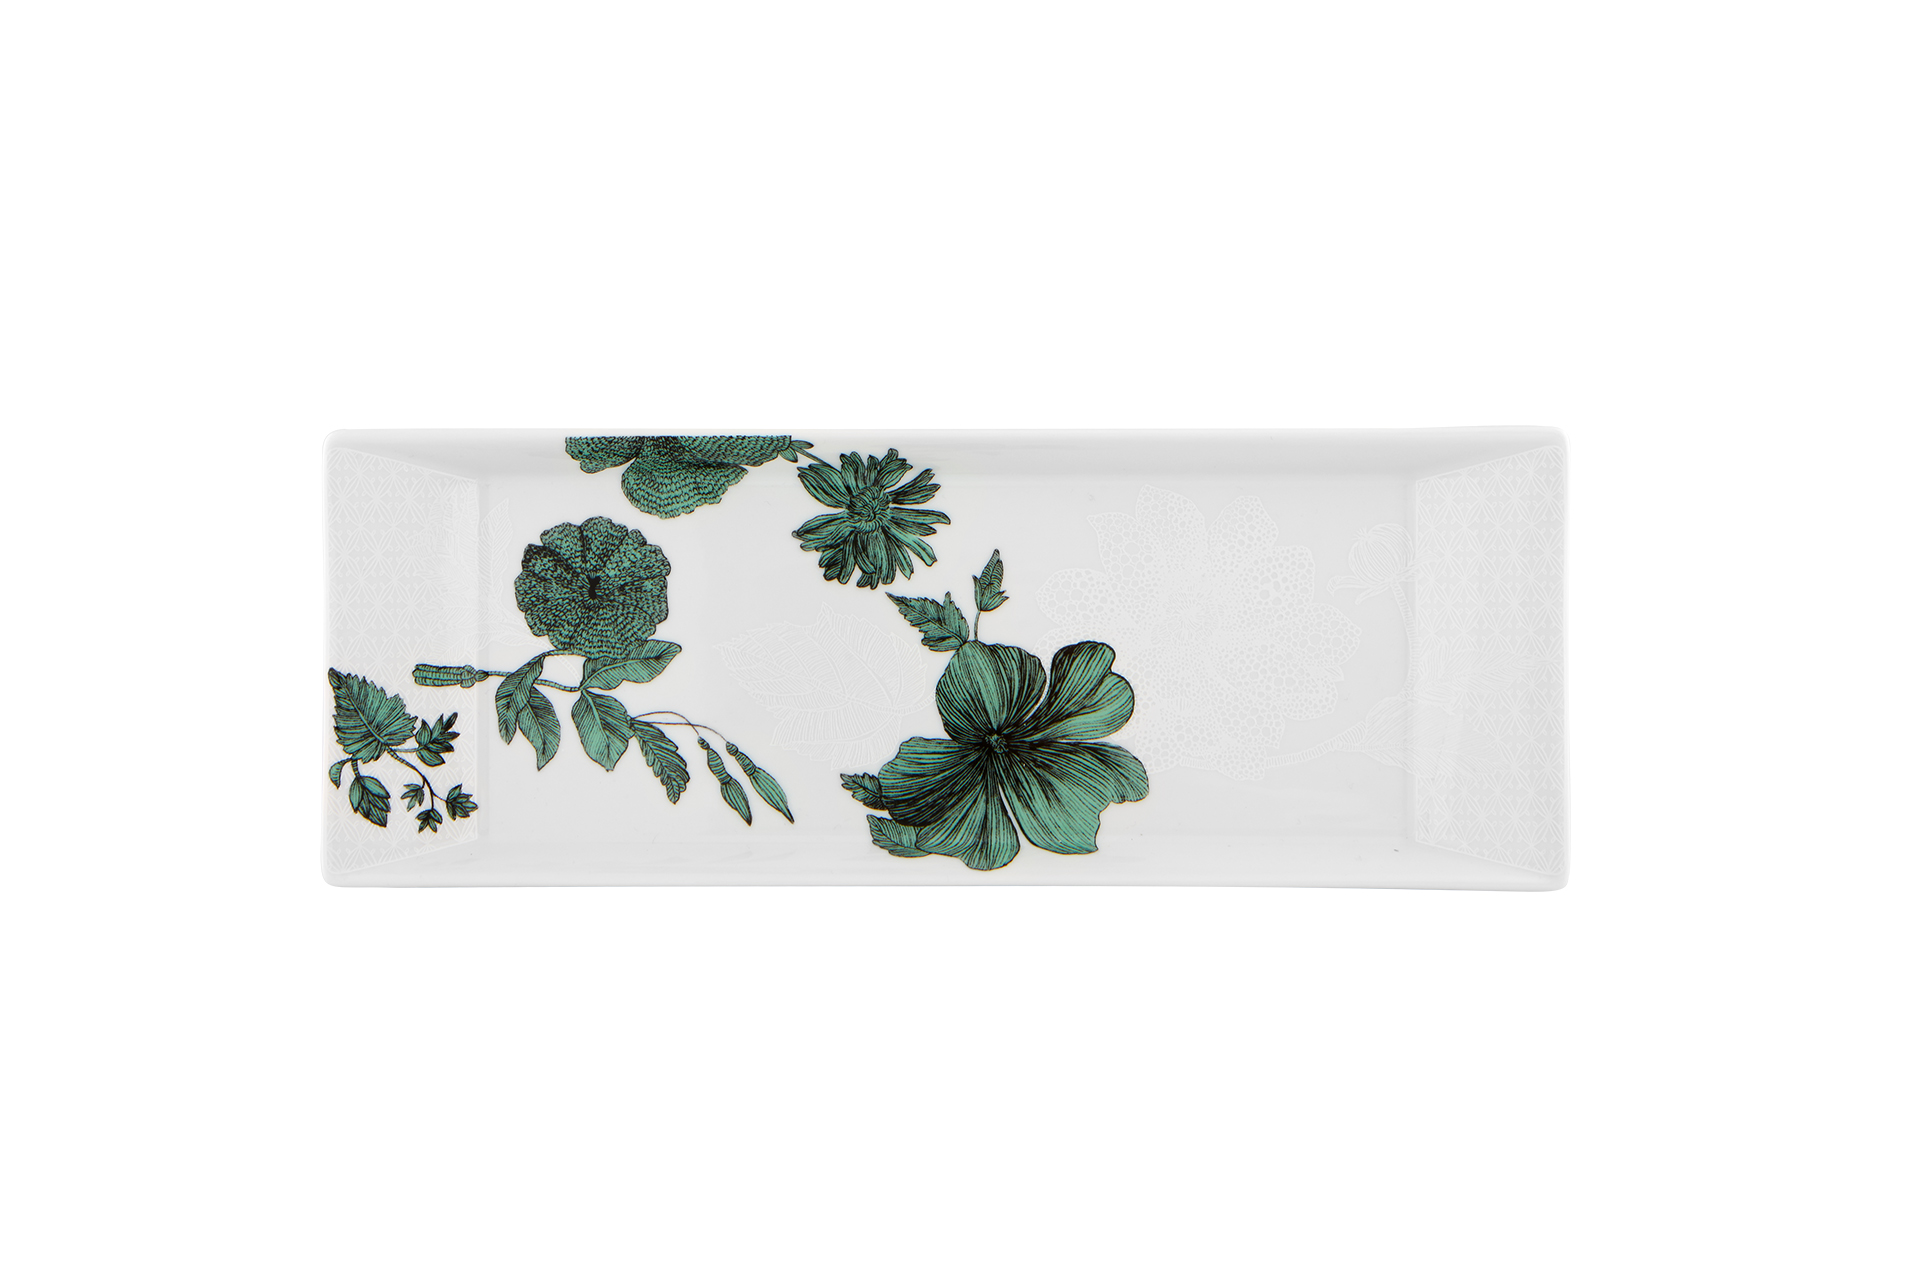 Vista Alegre Appetizer Tray Duality Collection